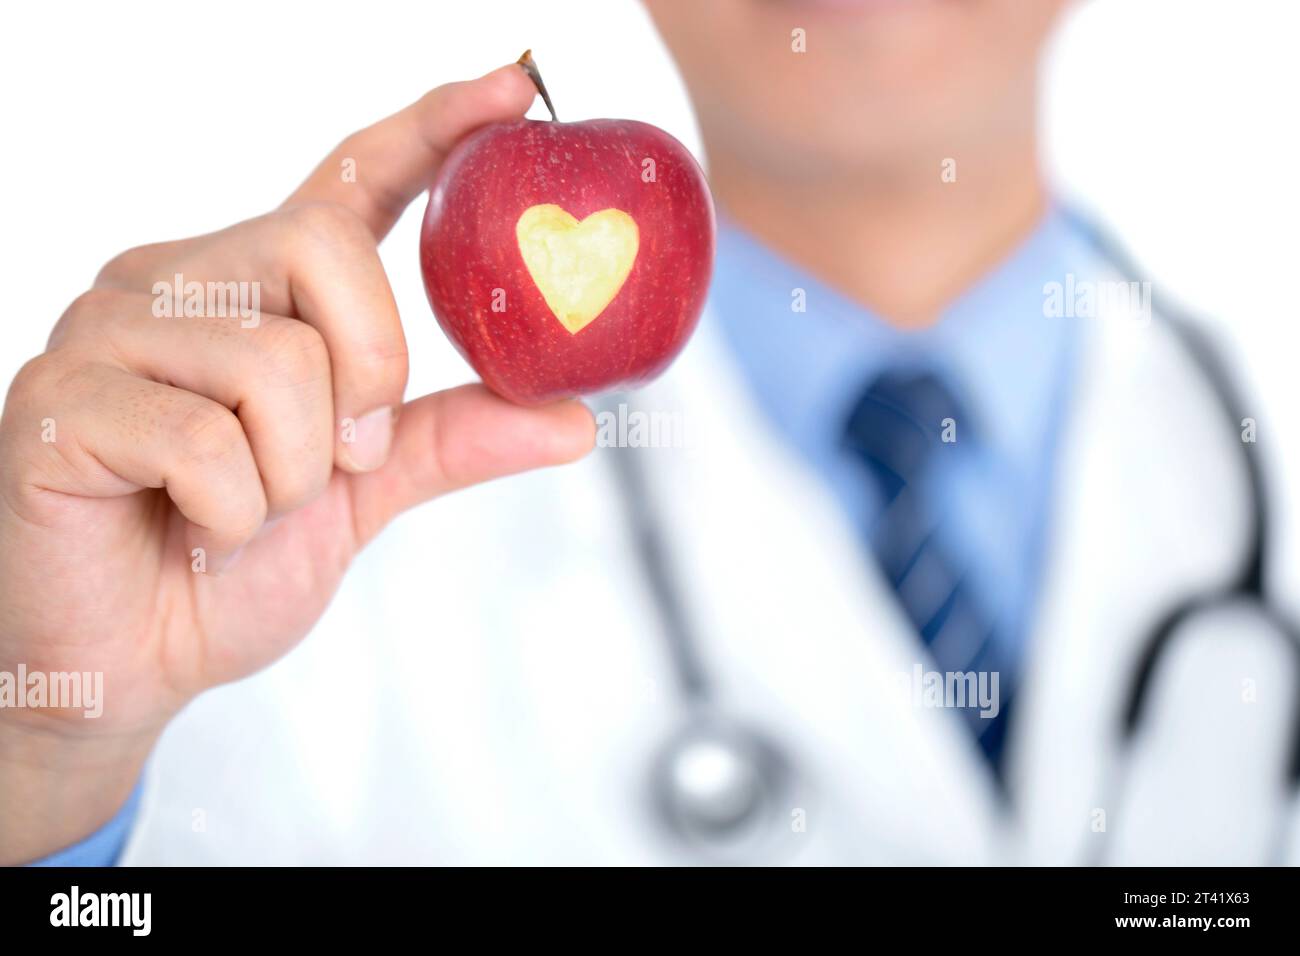 Healthy diet, conceptual image Stock Photo